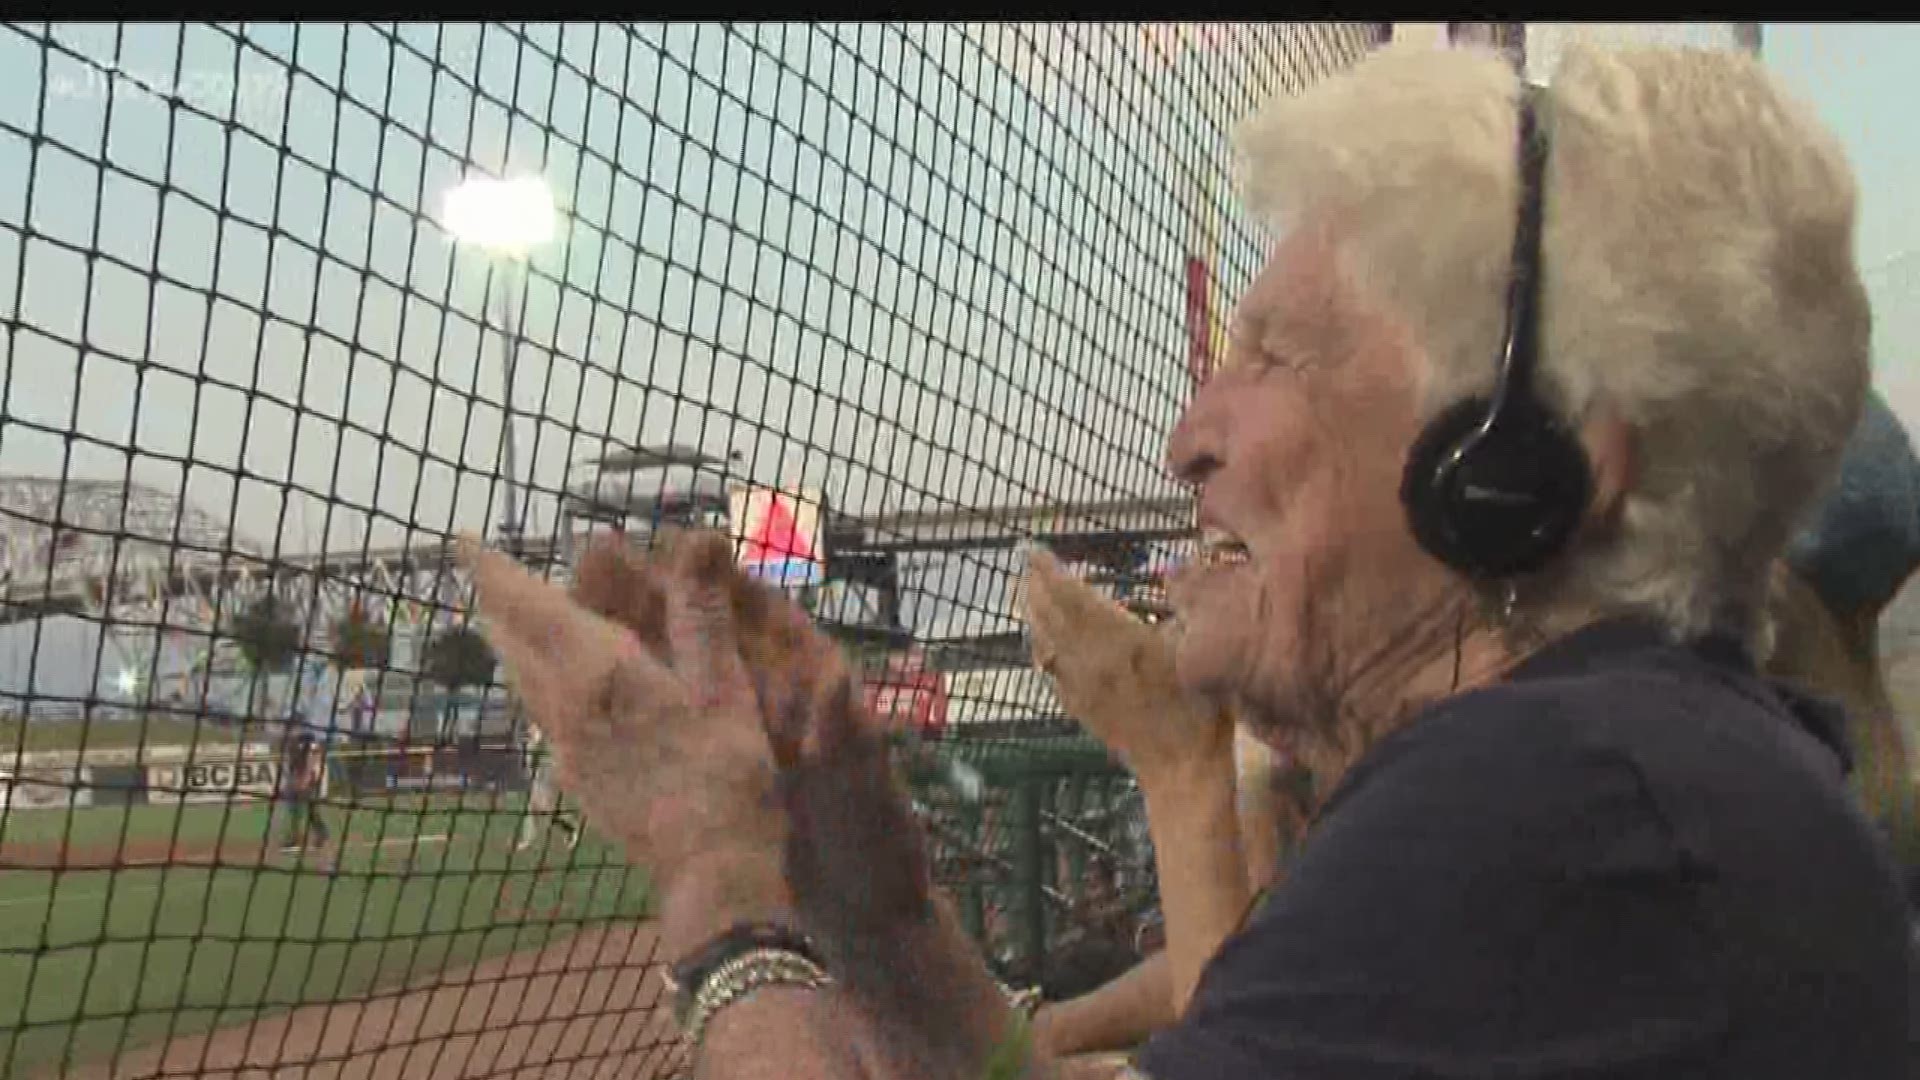 The 85-year-old fan doesn't miss a play. She keeps track of every hit, run and error, while adding a little of her own commentary along the way.